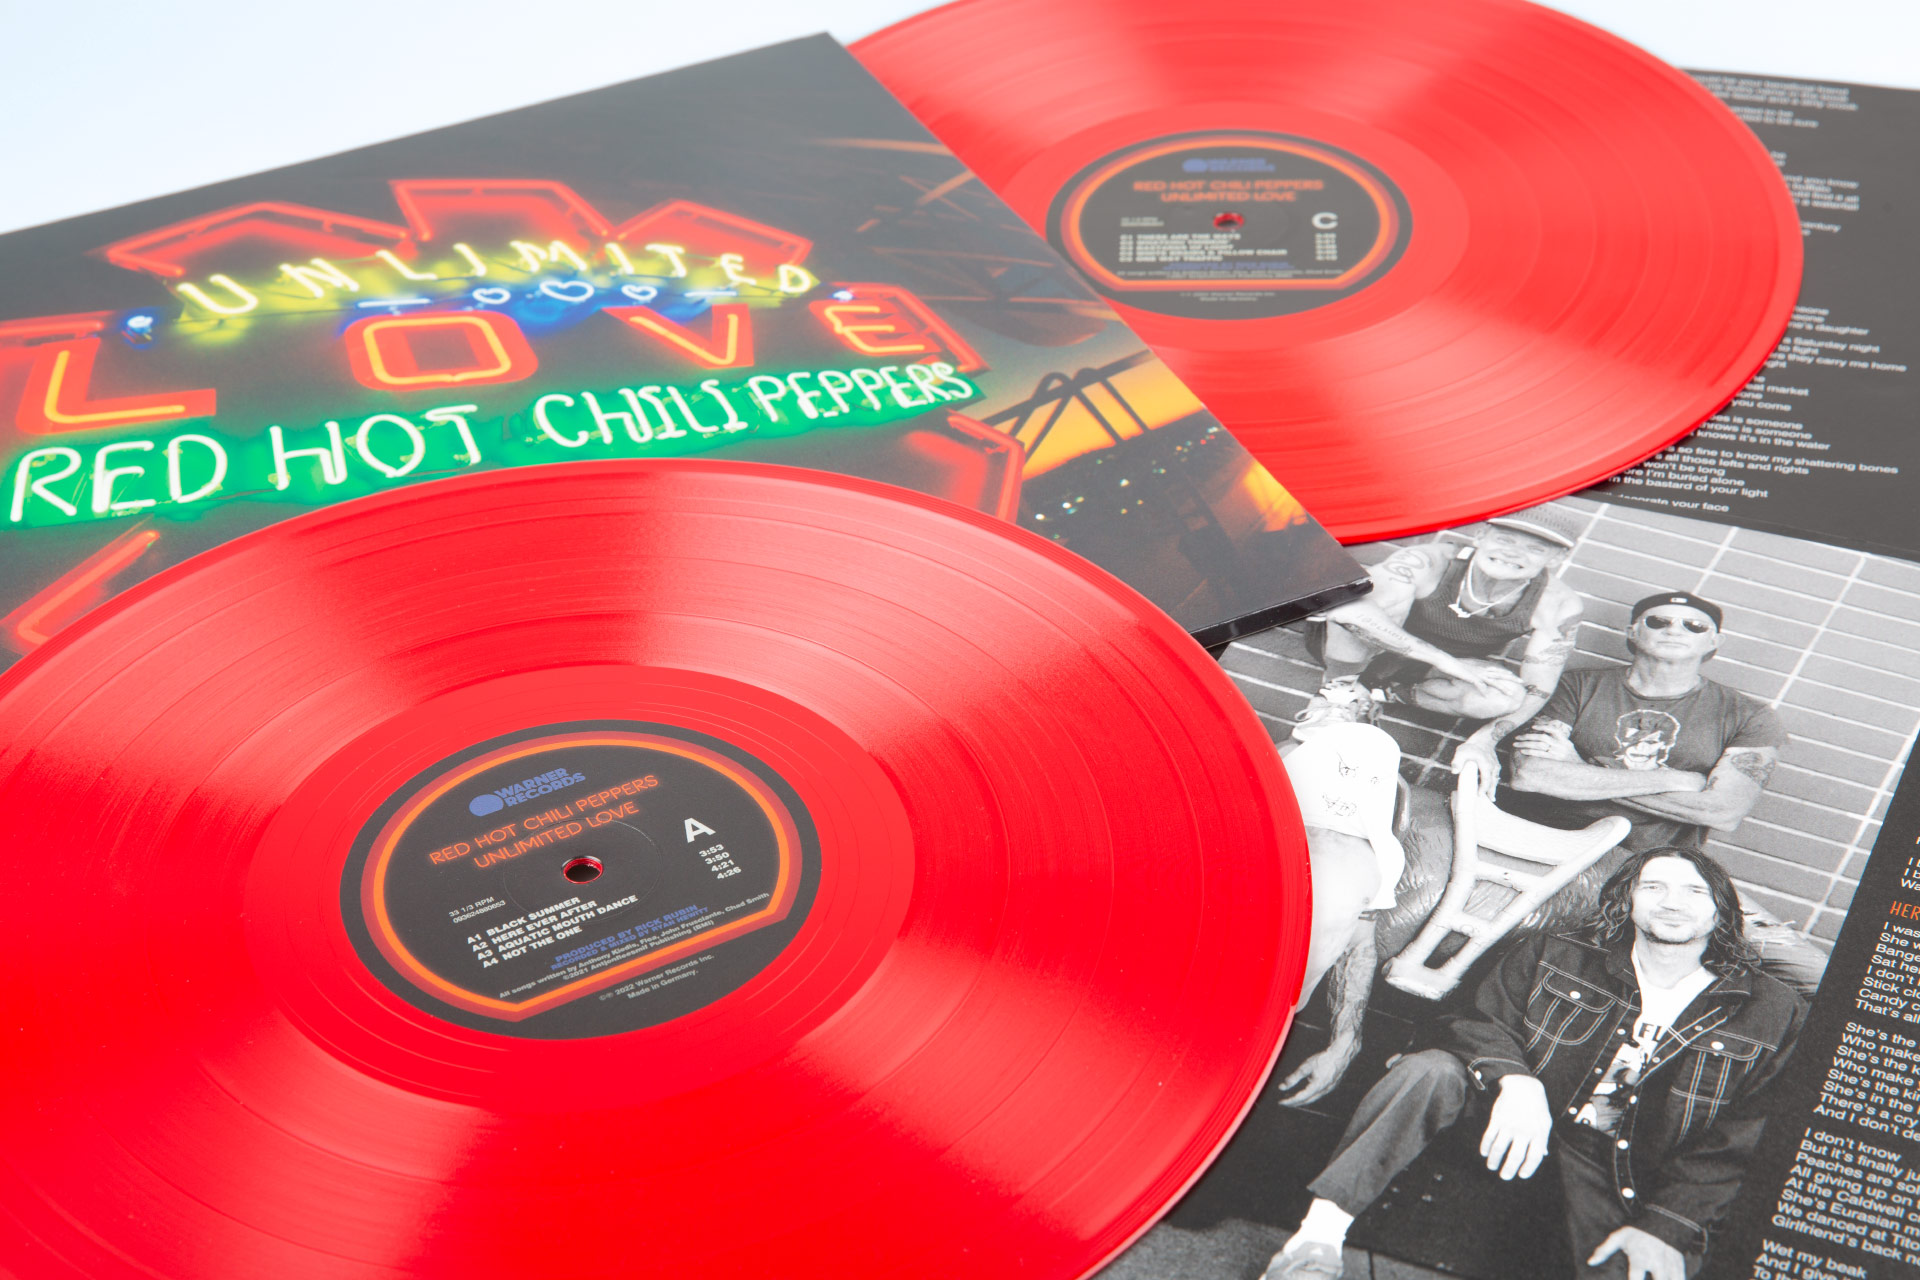 Townsend Music Online Record Store - Vinyl, CDs, Cassettes and Merch - Red  Hot Chili Peppers - Unlimited Love Vinyl Bundle